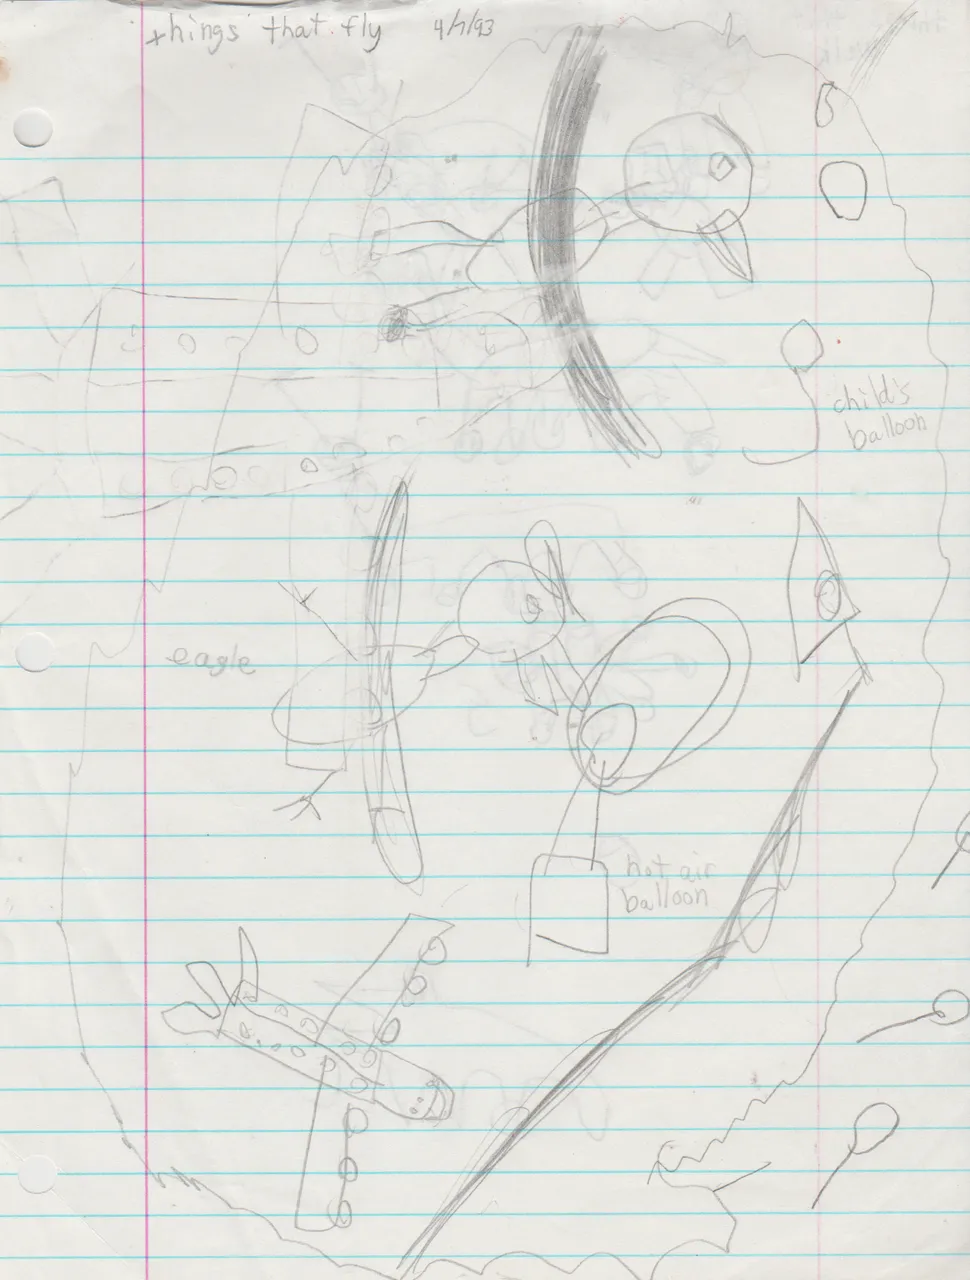 1993-04-07 - Wednesday - Things that fly or swim or other things series of drawings-1.png